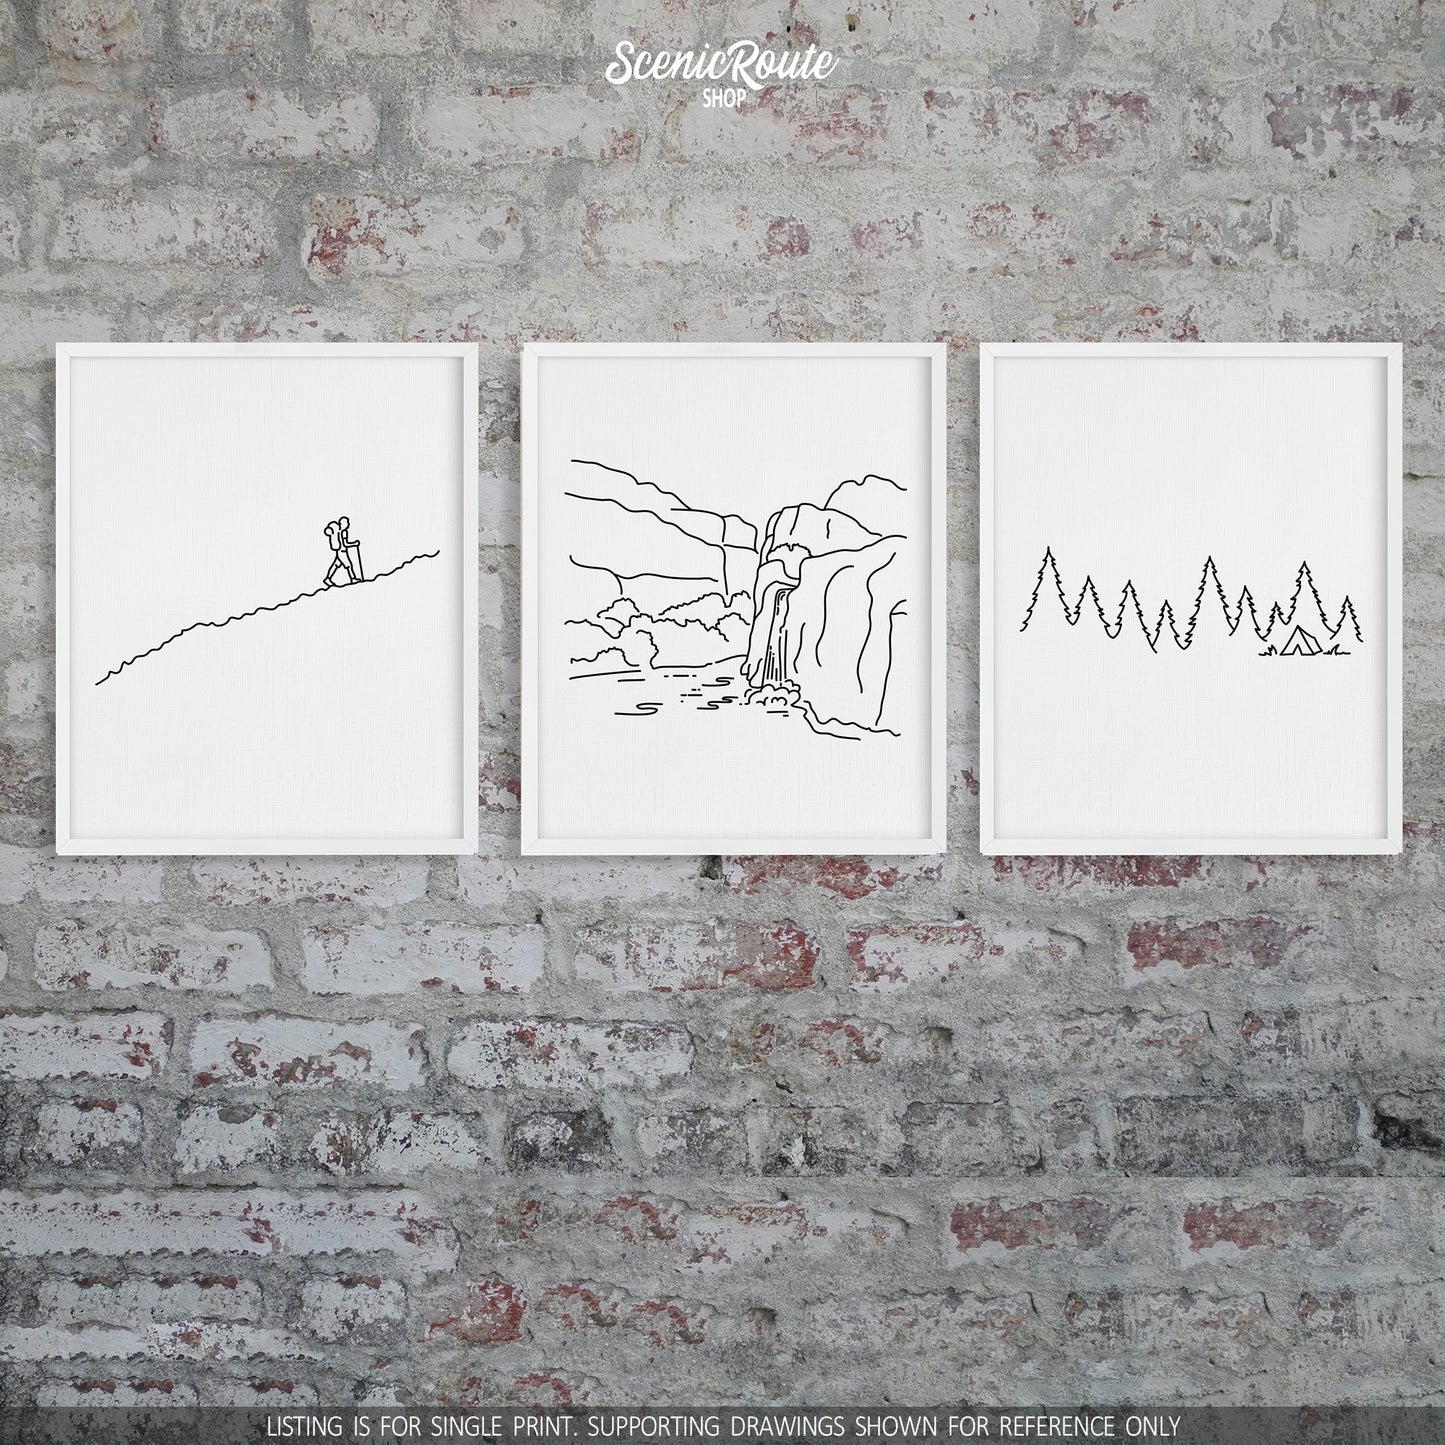 A group of three framed drawings on a brick wall. The line art drawings include a person Hiking, Havasu Falls, and Camping